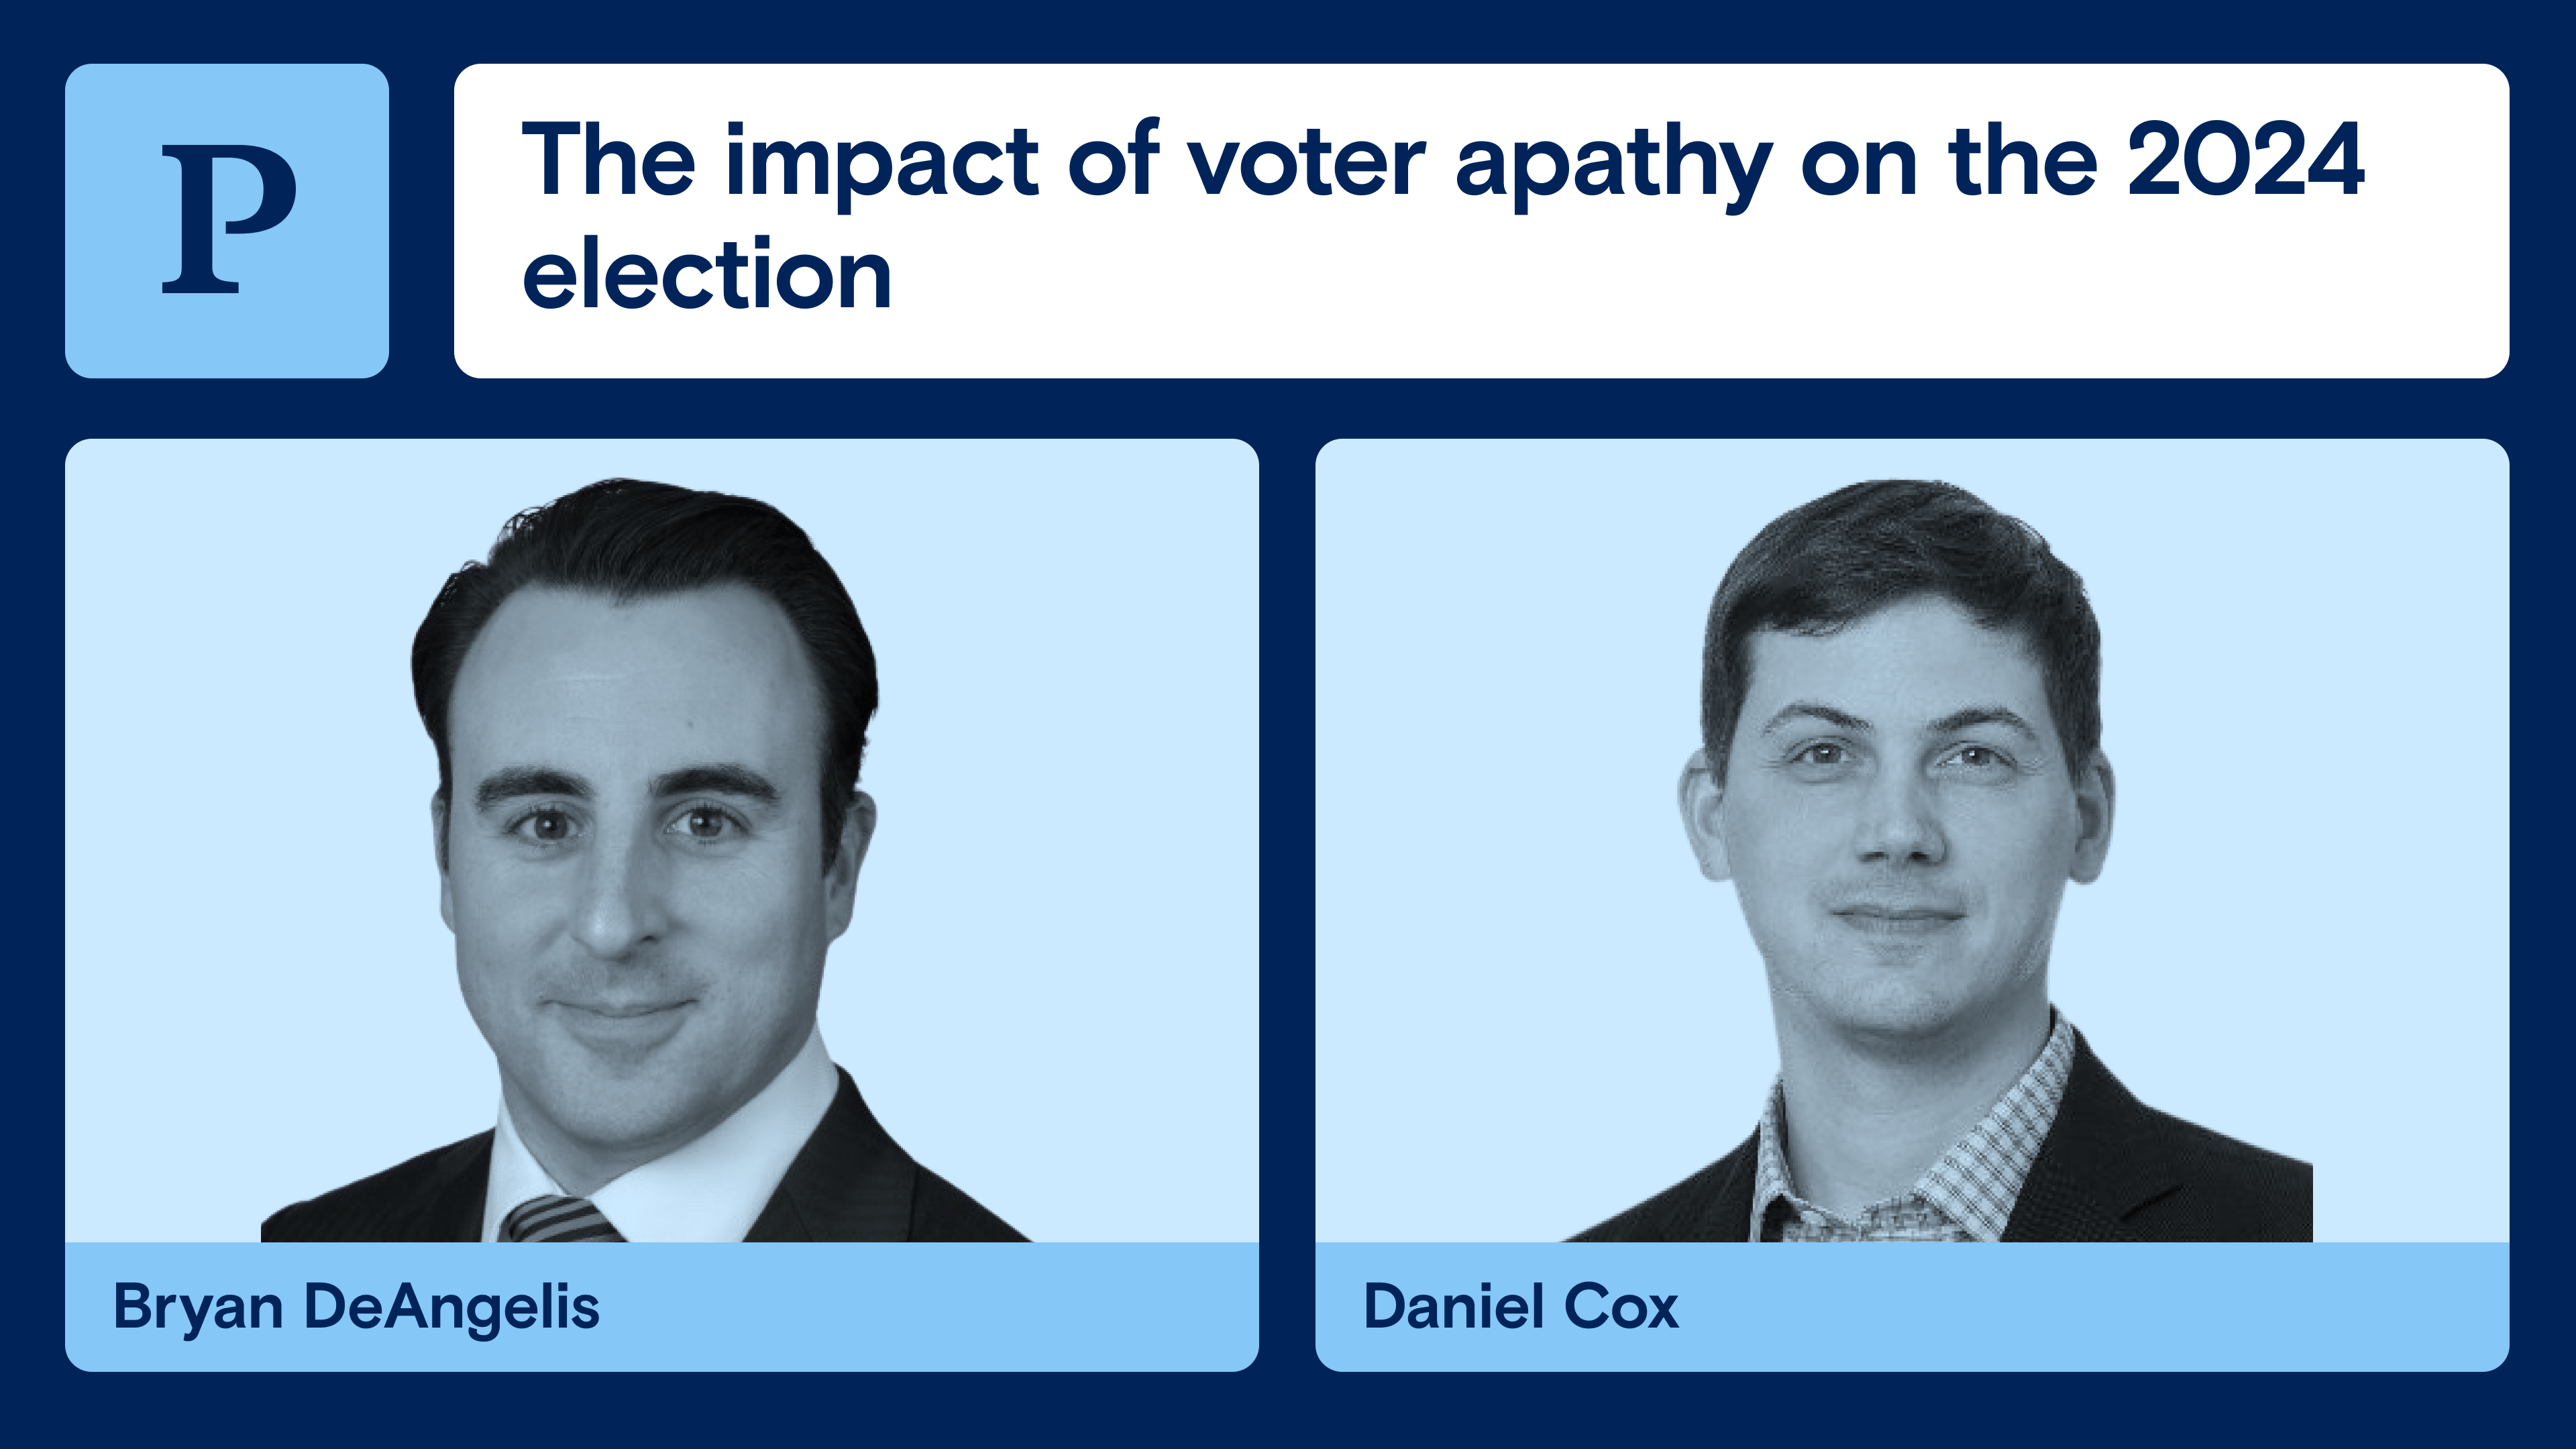 The impact of voter apathy on the 2024 election